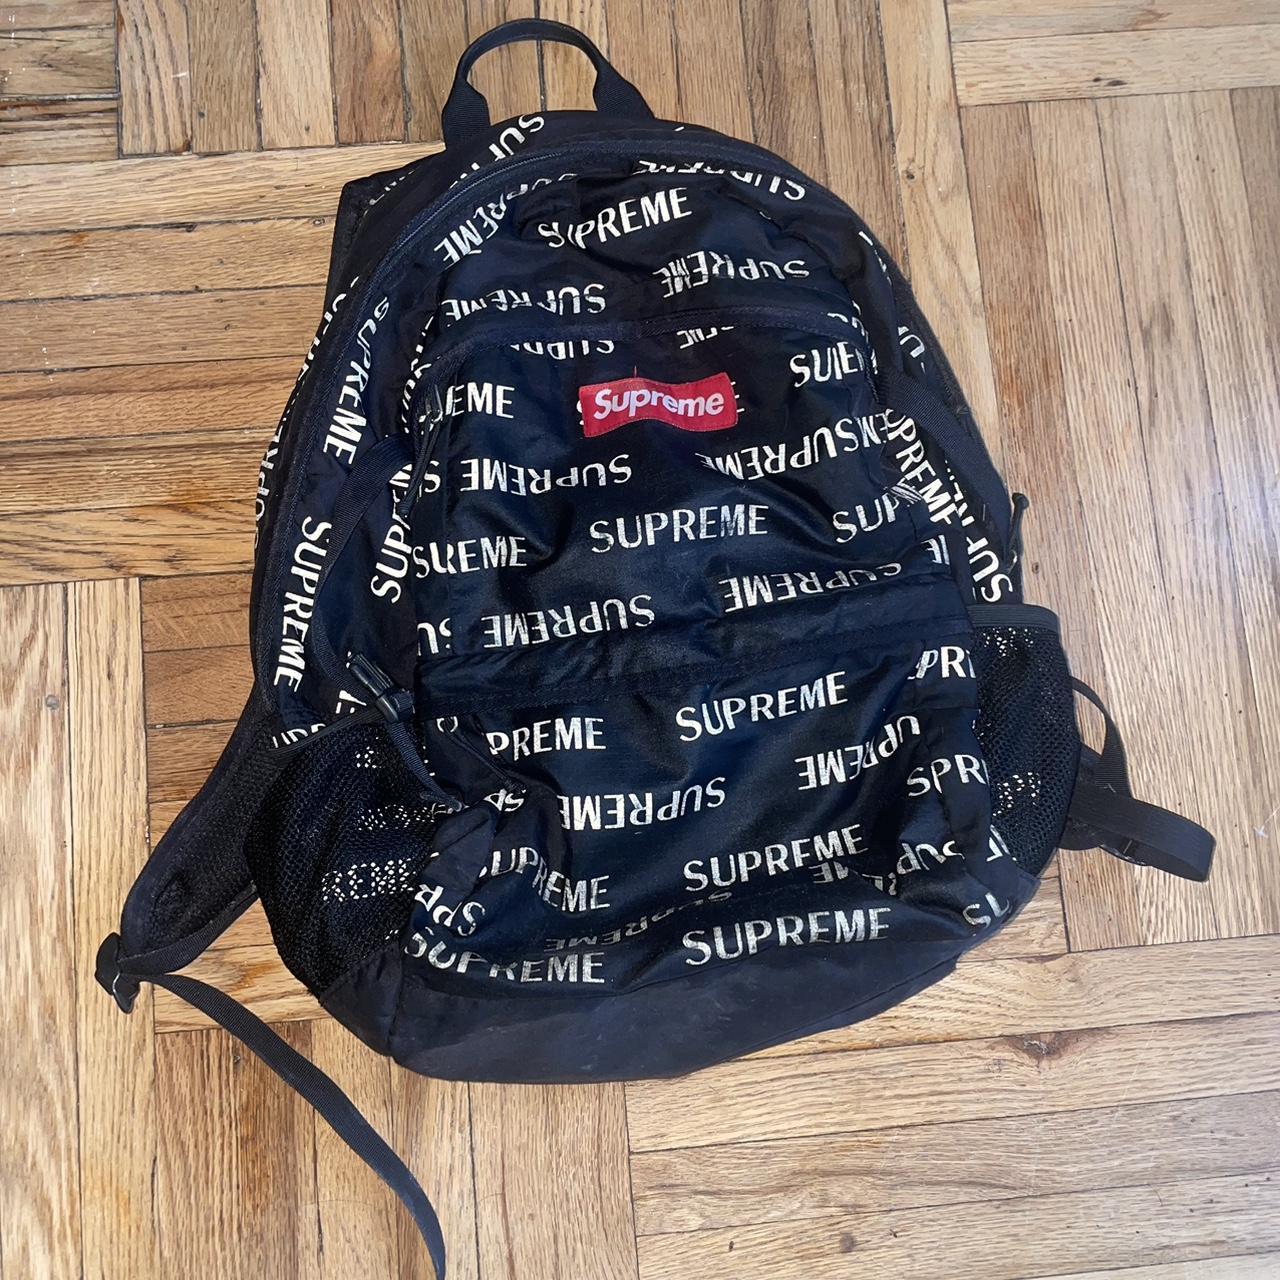 Genuine supreme FW17 red backpack Selling due to I - Depop